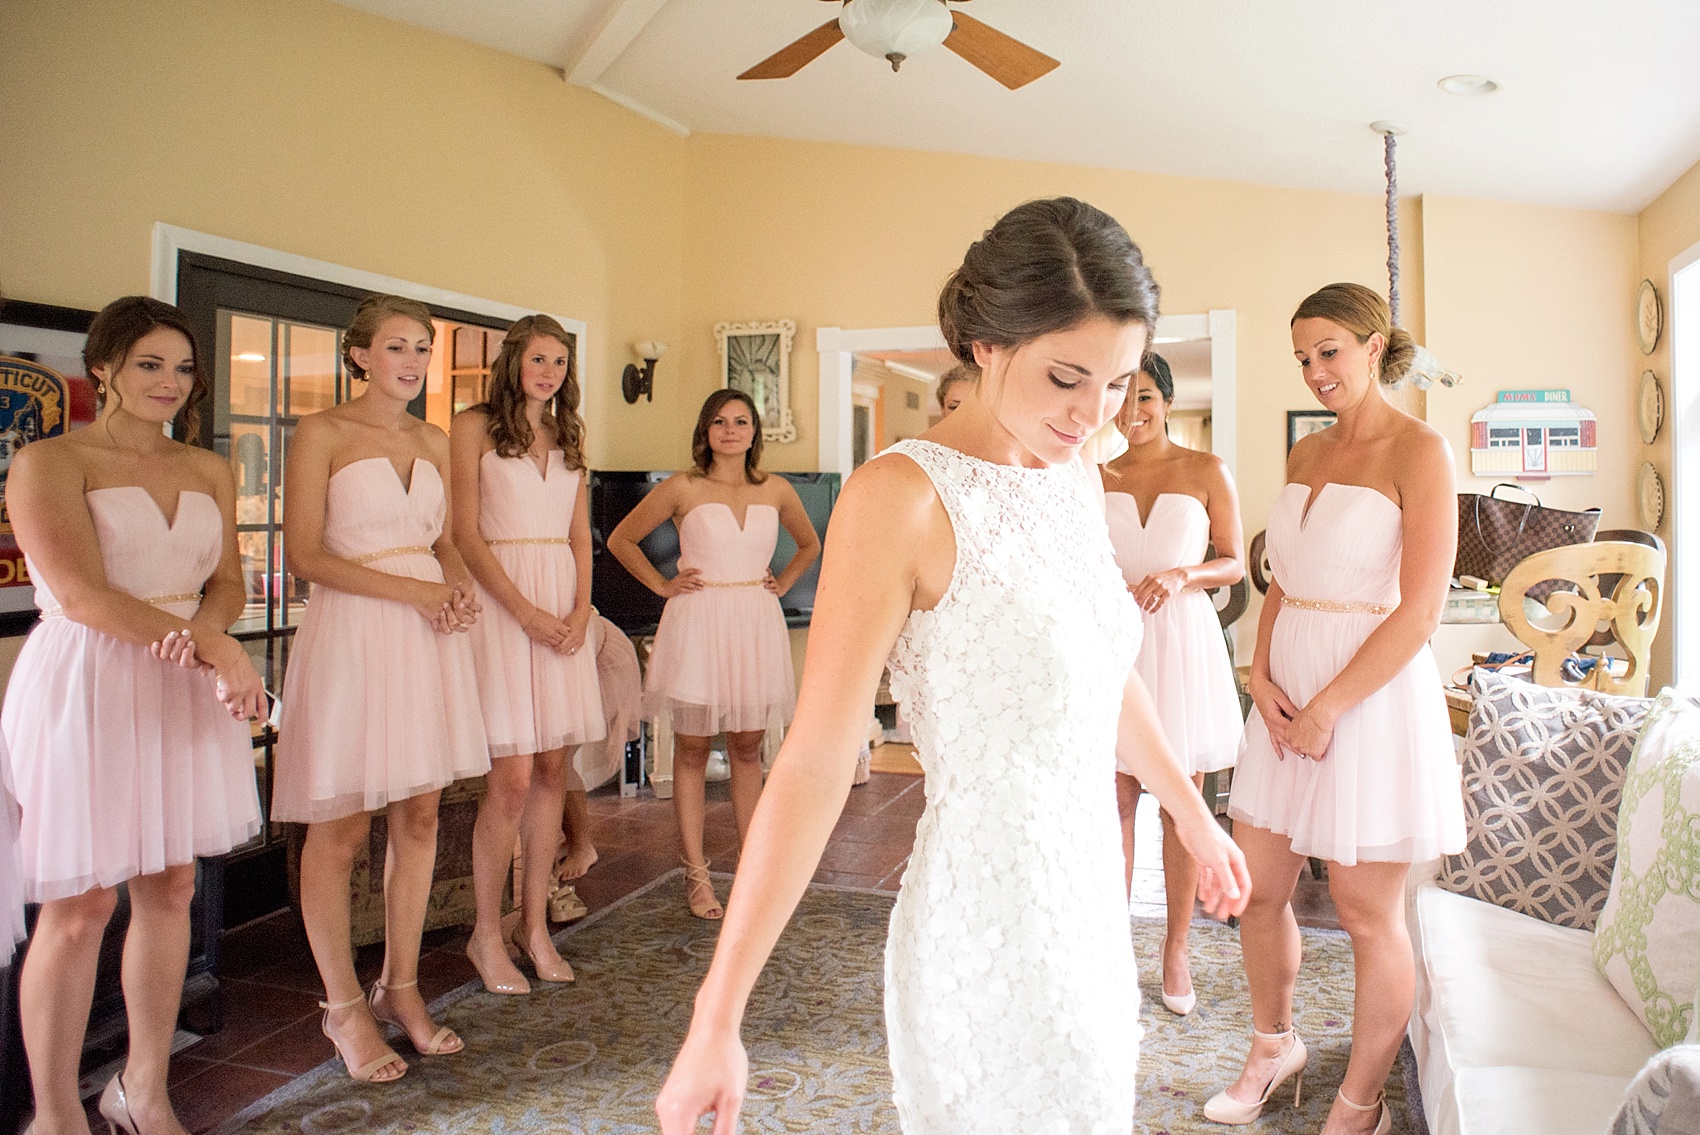 Getting ready wedding photos with pink bridesmaids. By NYC wedding photographer Mikkel Paige Photography.